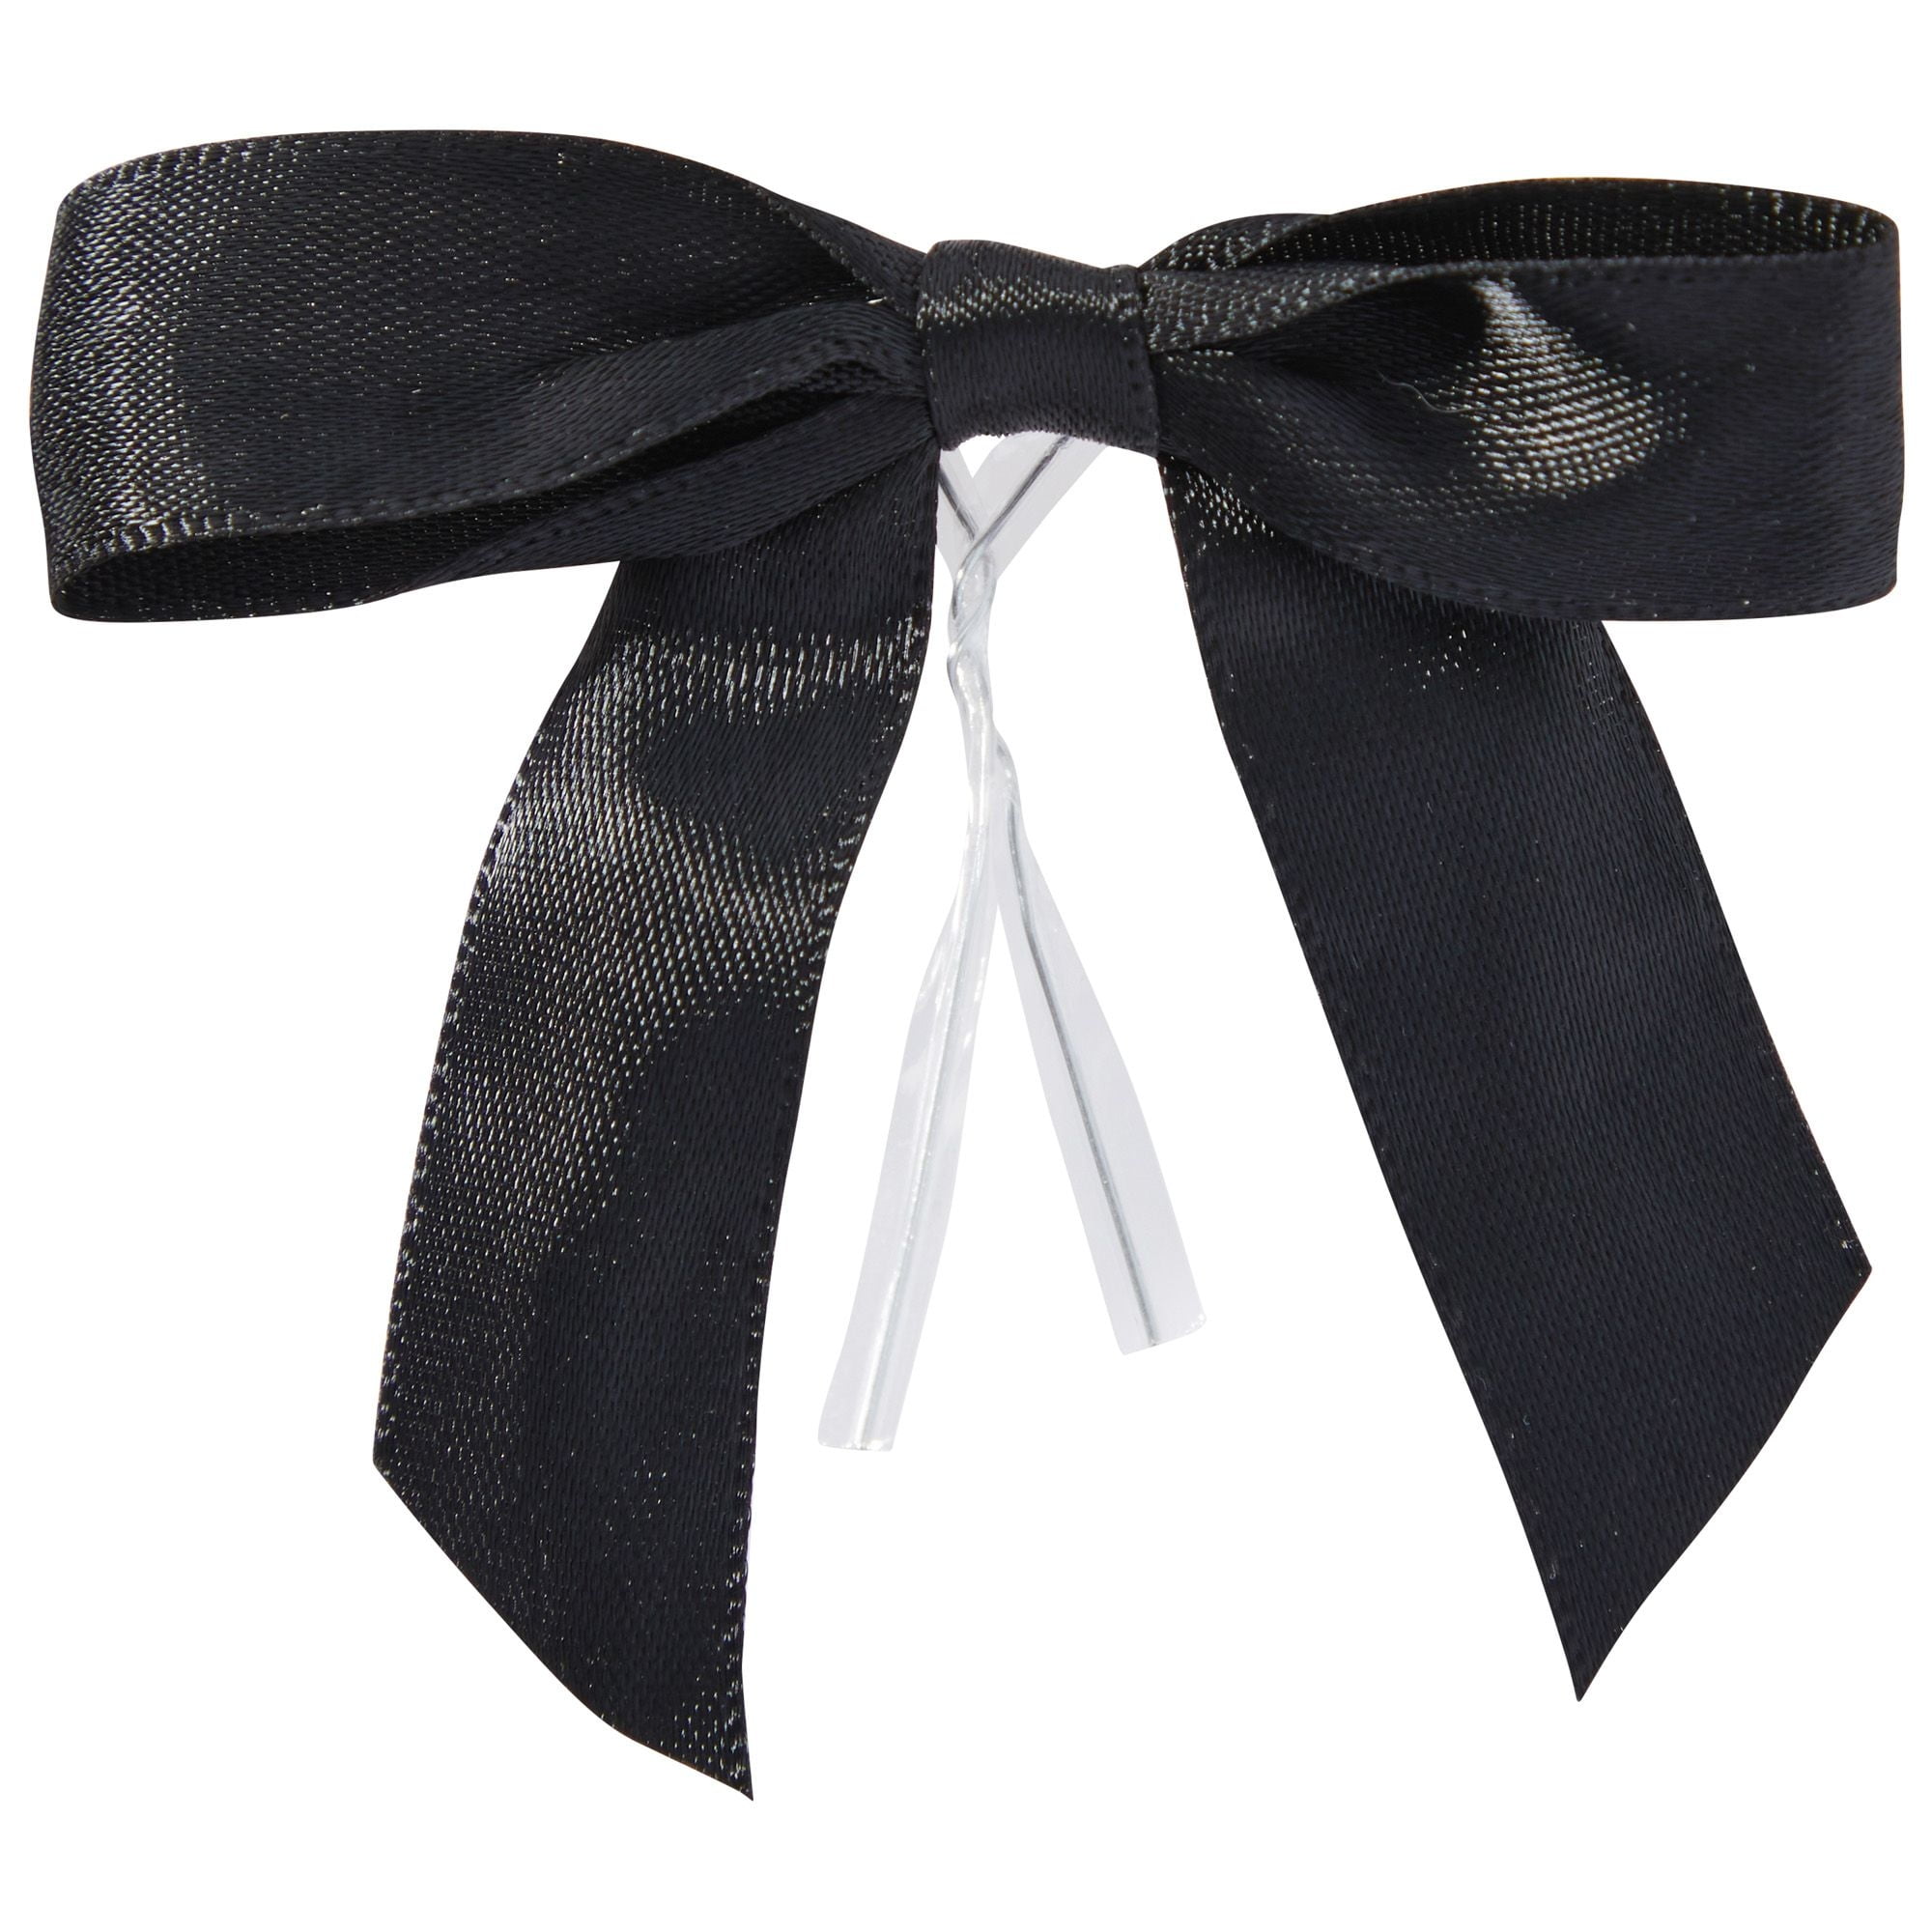 Ribbli Black Satin Ribbon Double Faced Satin 3/8 Inch x Continuous 50  Yards-Black Ribbon for Gift Wrapping Crafts Wedding Decoration Bows Bouquet